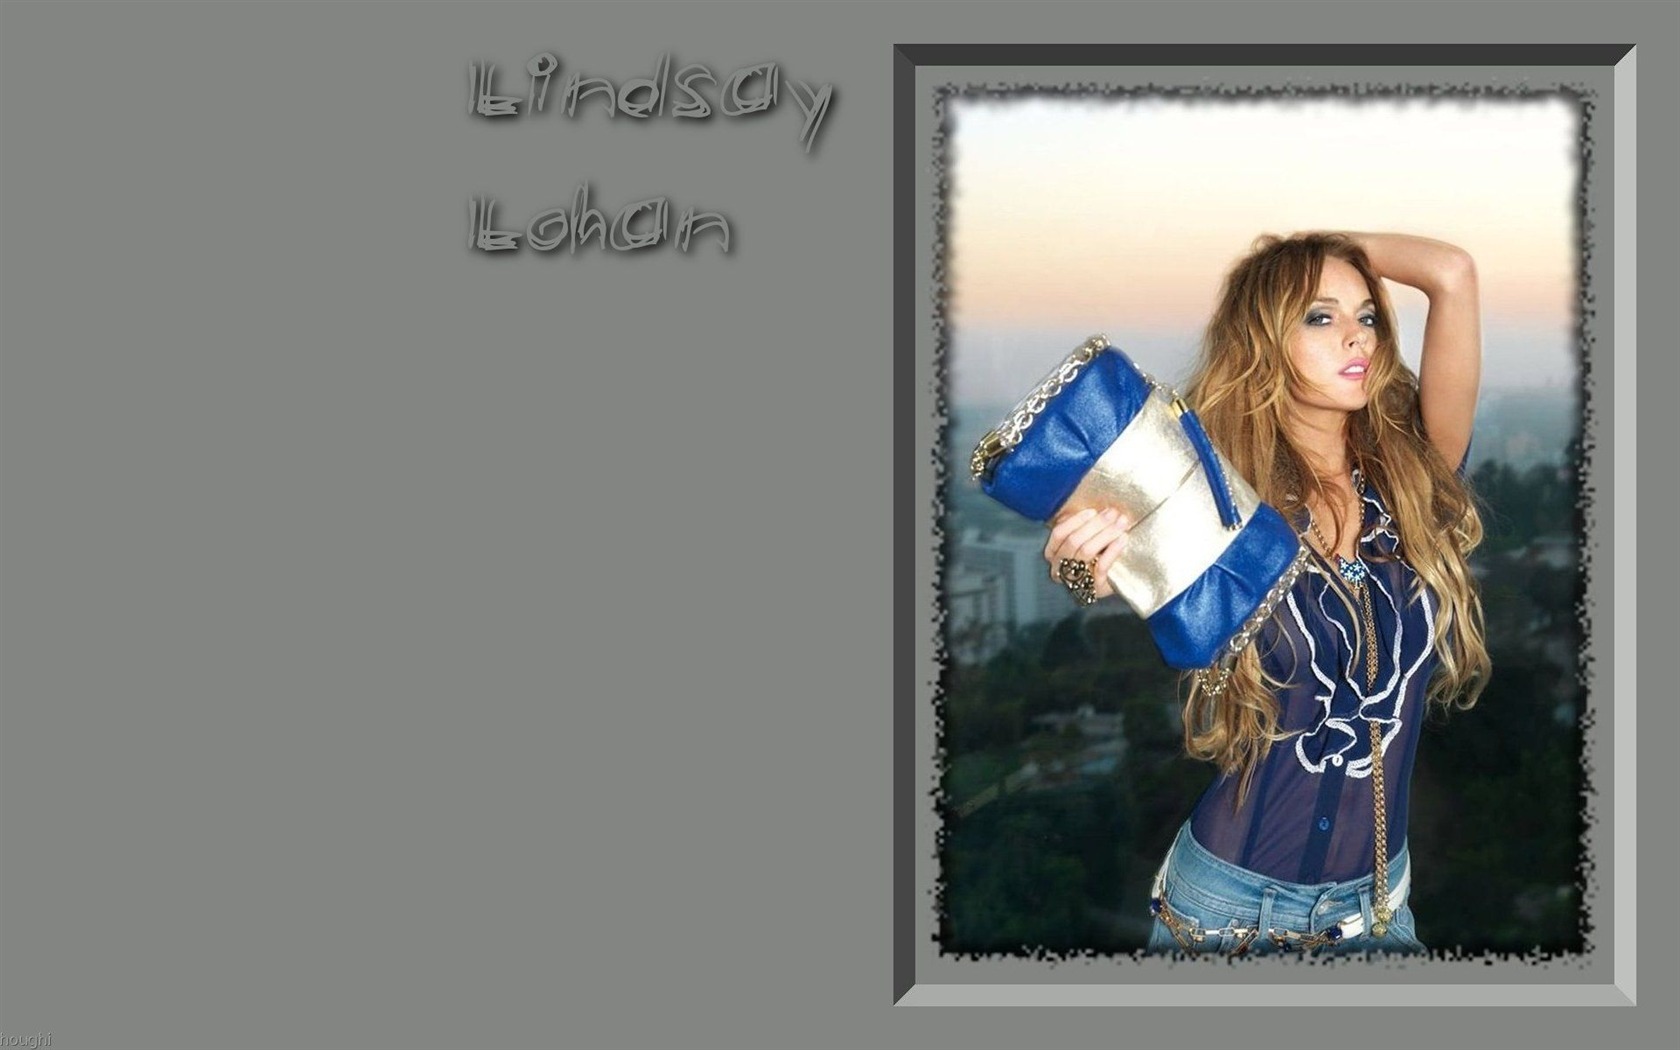 Lindsay Lohan #018 - 1680x1050 Wallpapers Pictures Photos Images